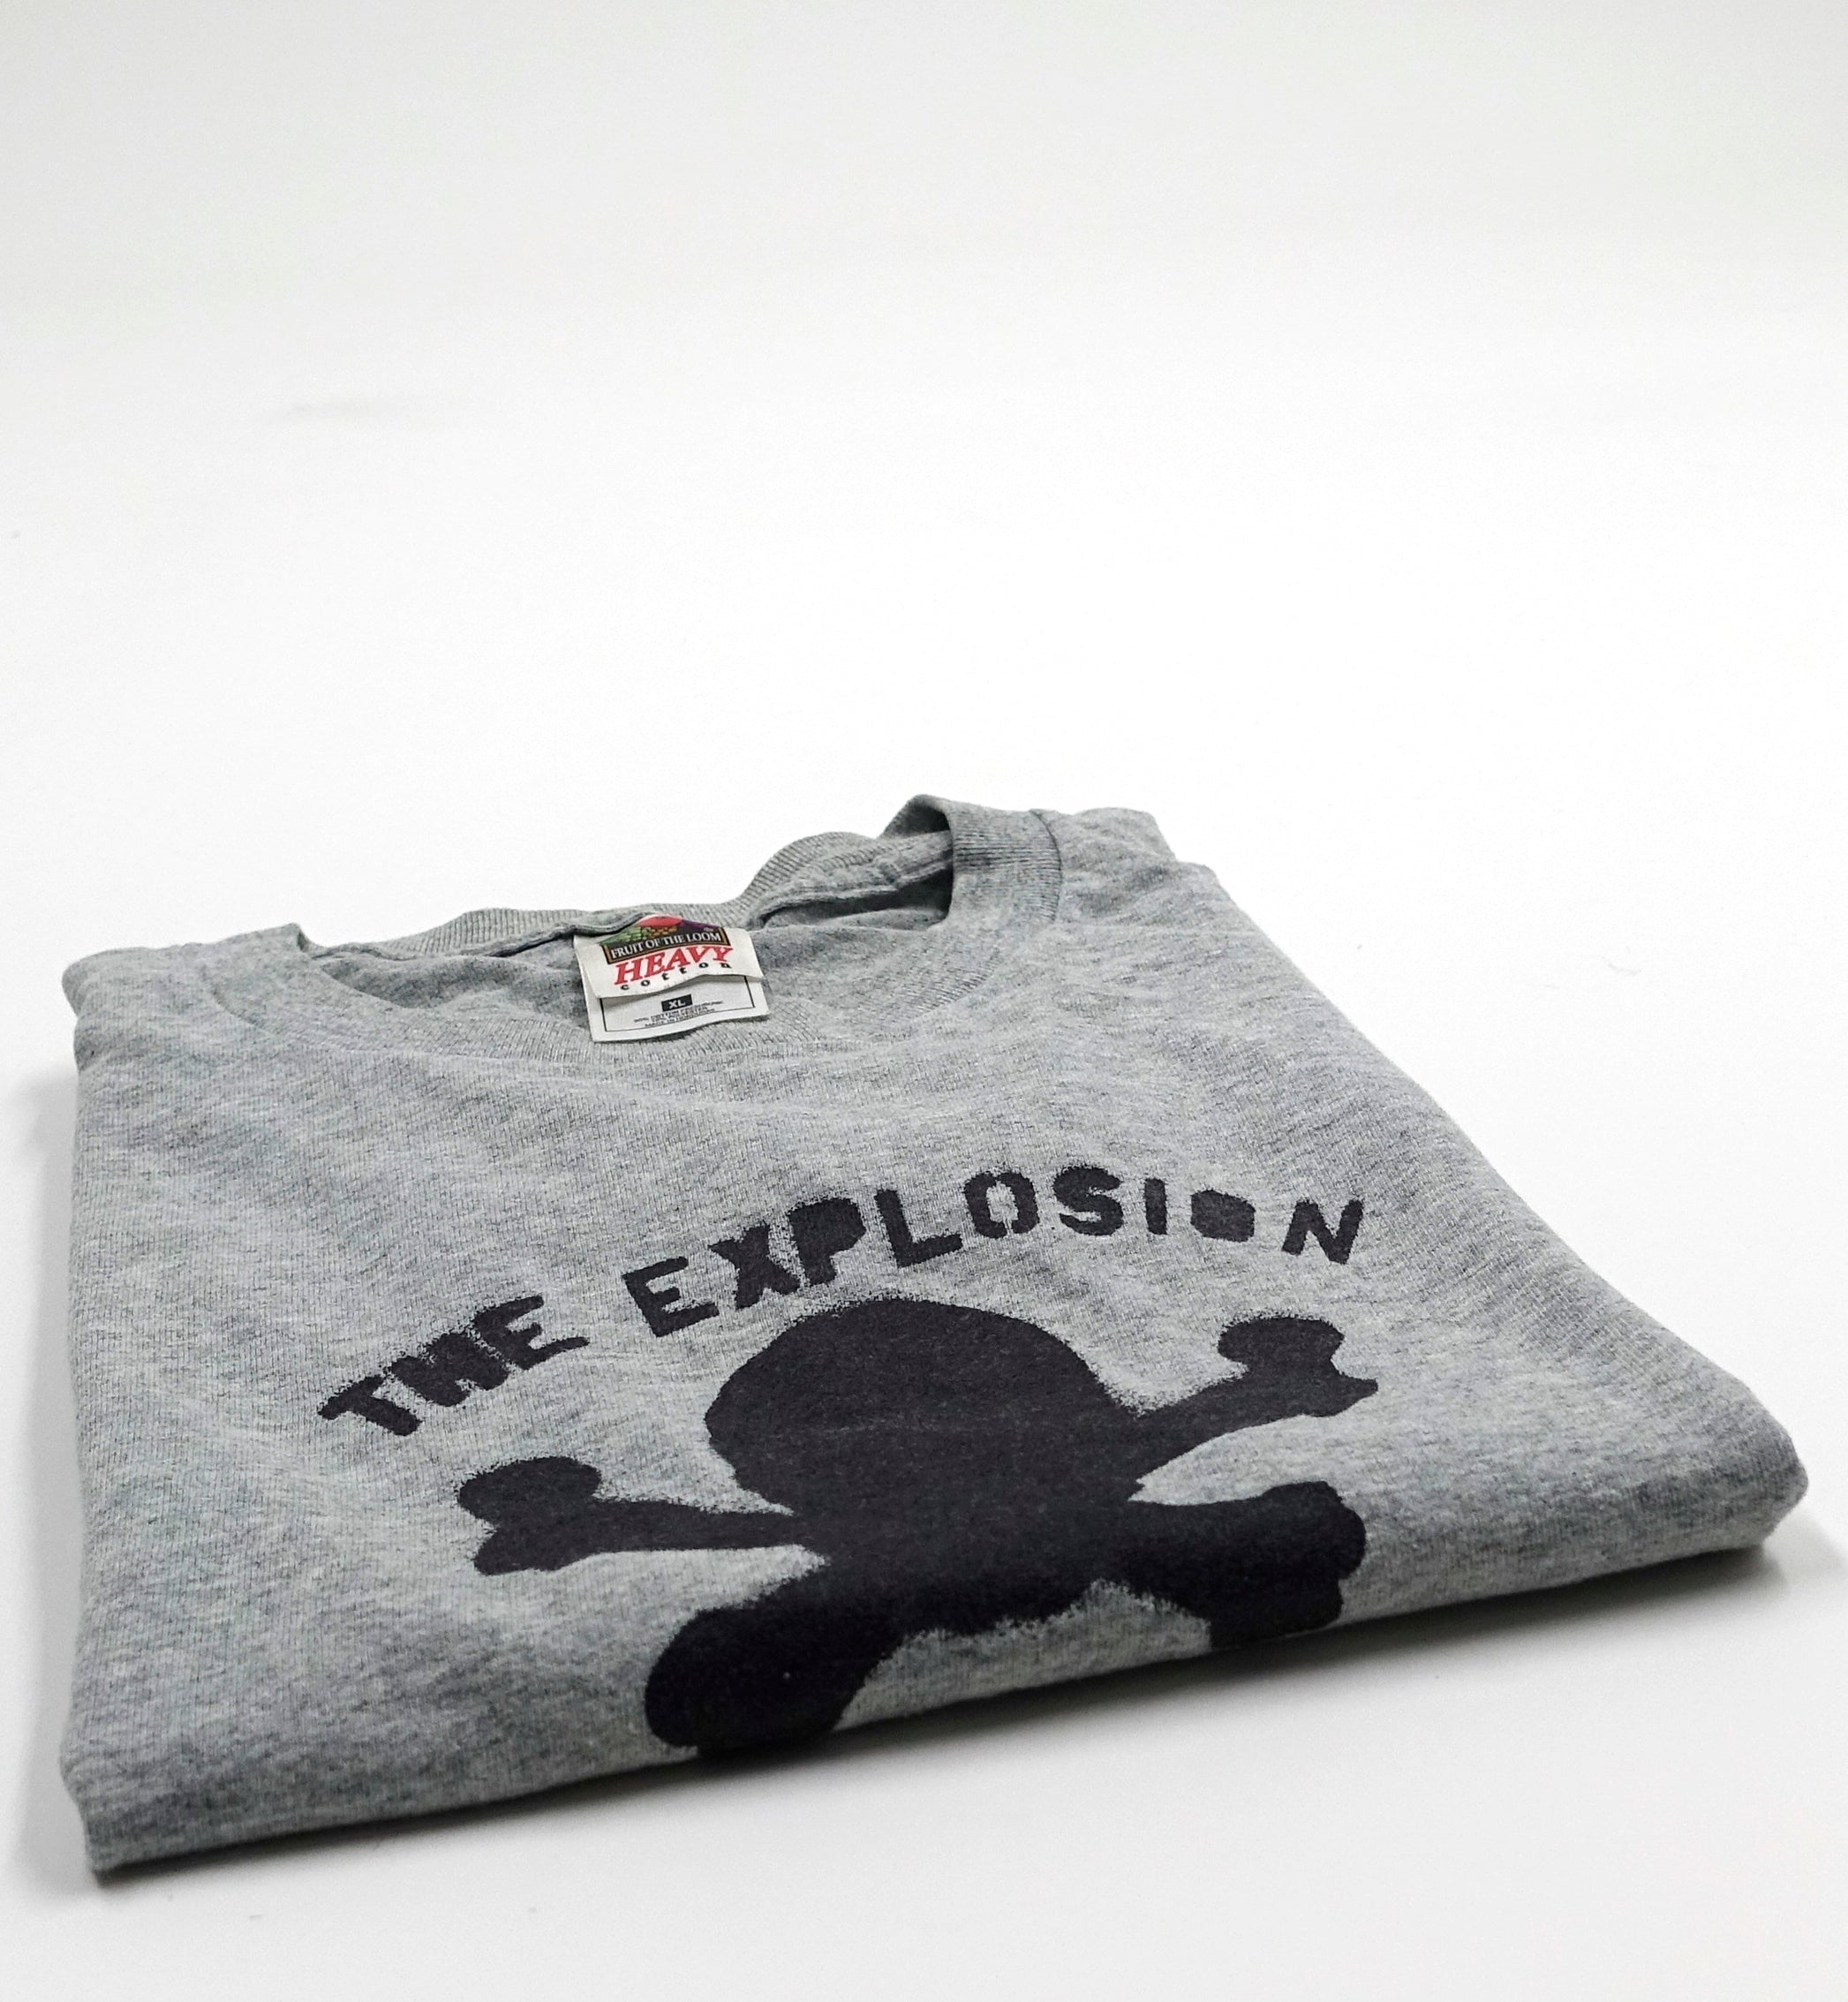 the Explosion ‎– Spray Stencil Skull And Crossbones 00's Tour Shirt Size XL